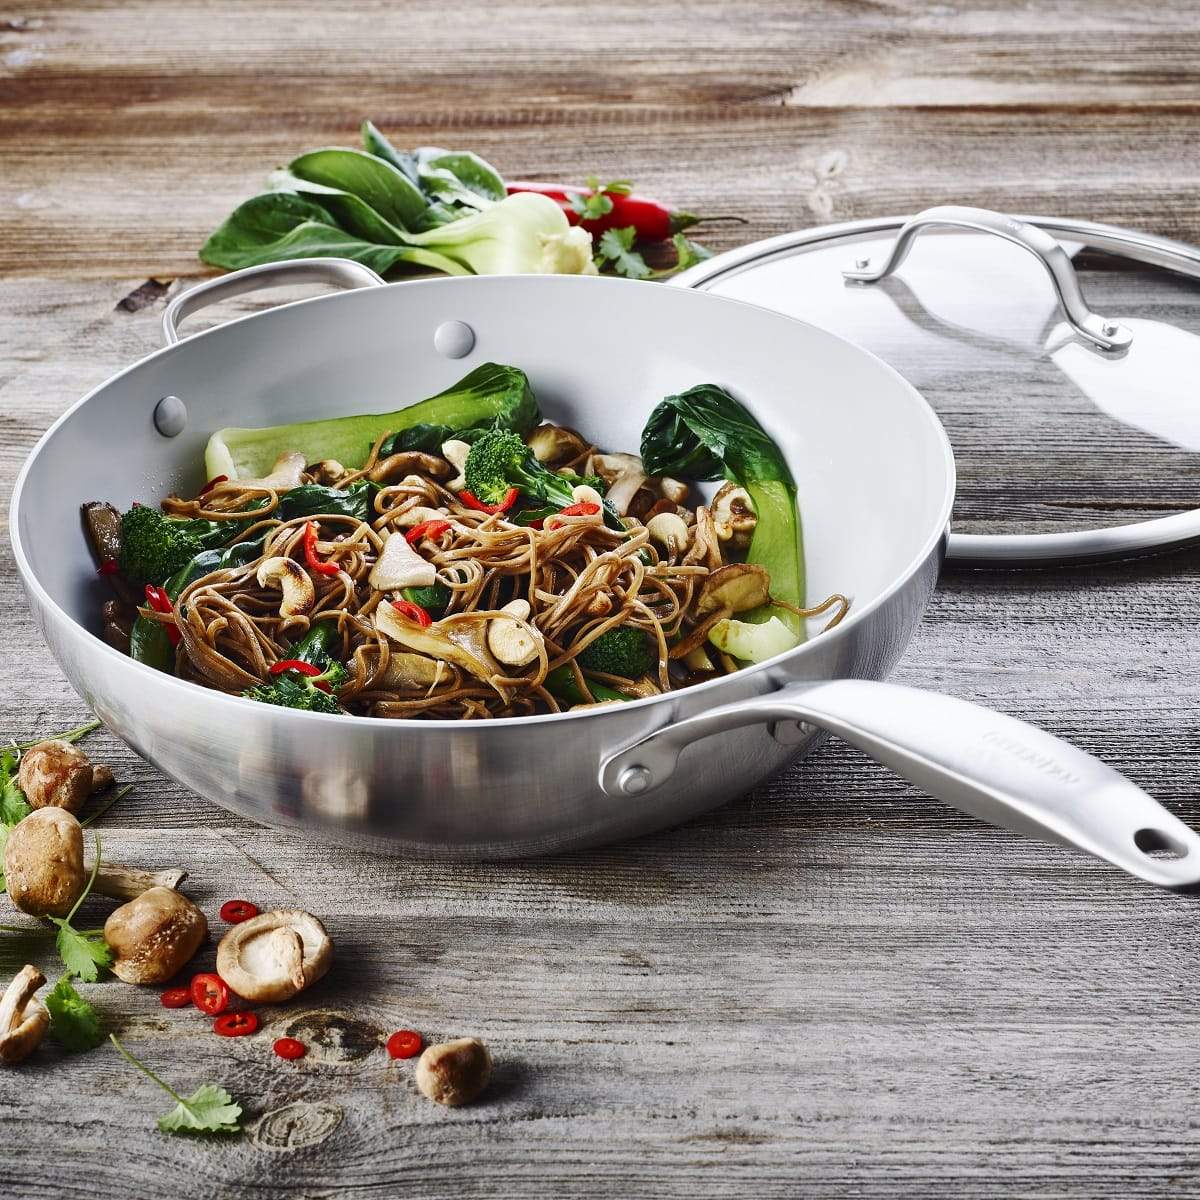 CC002258-001 - Venice Pro Wok with Lid, Stainless Steel - 30cm - Product Image 2